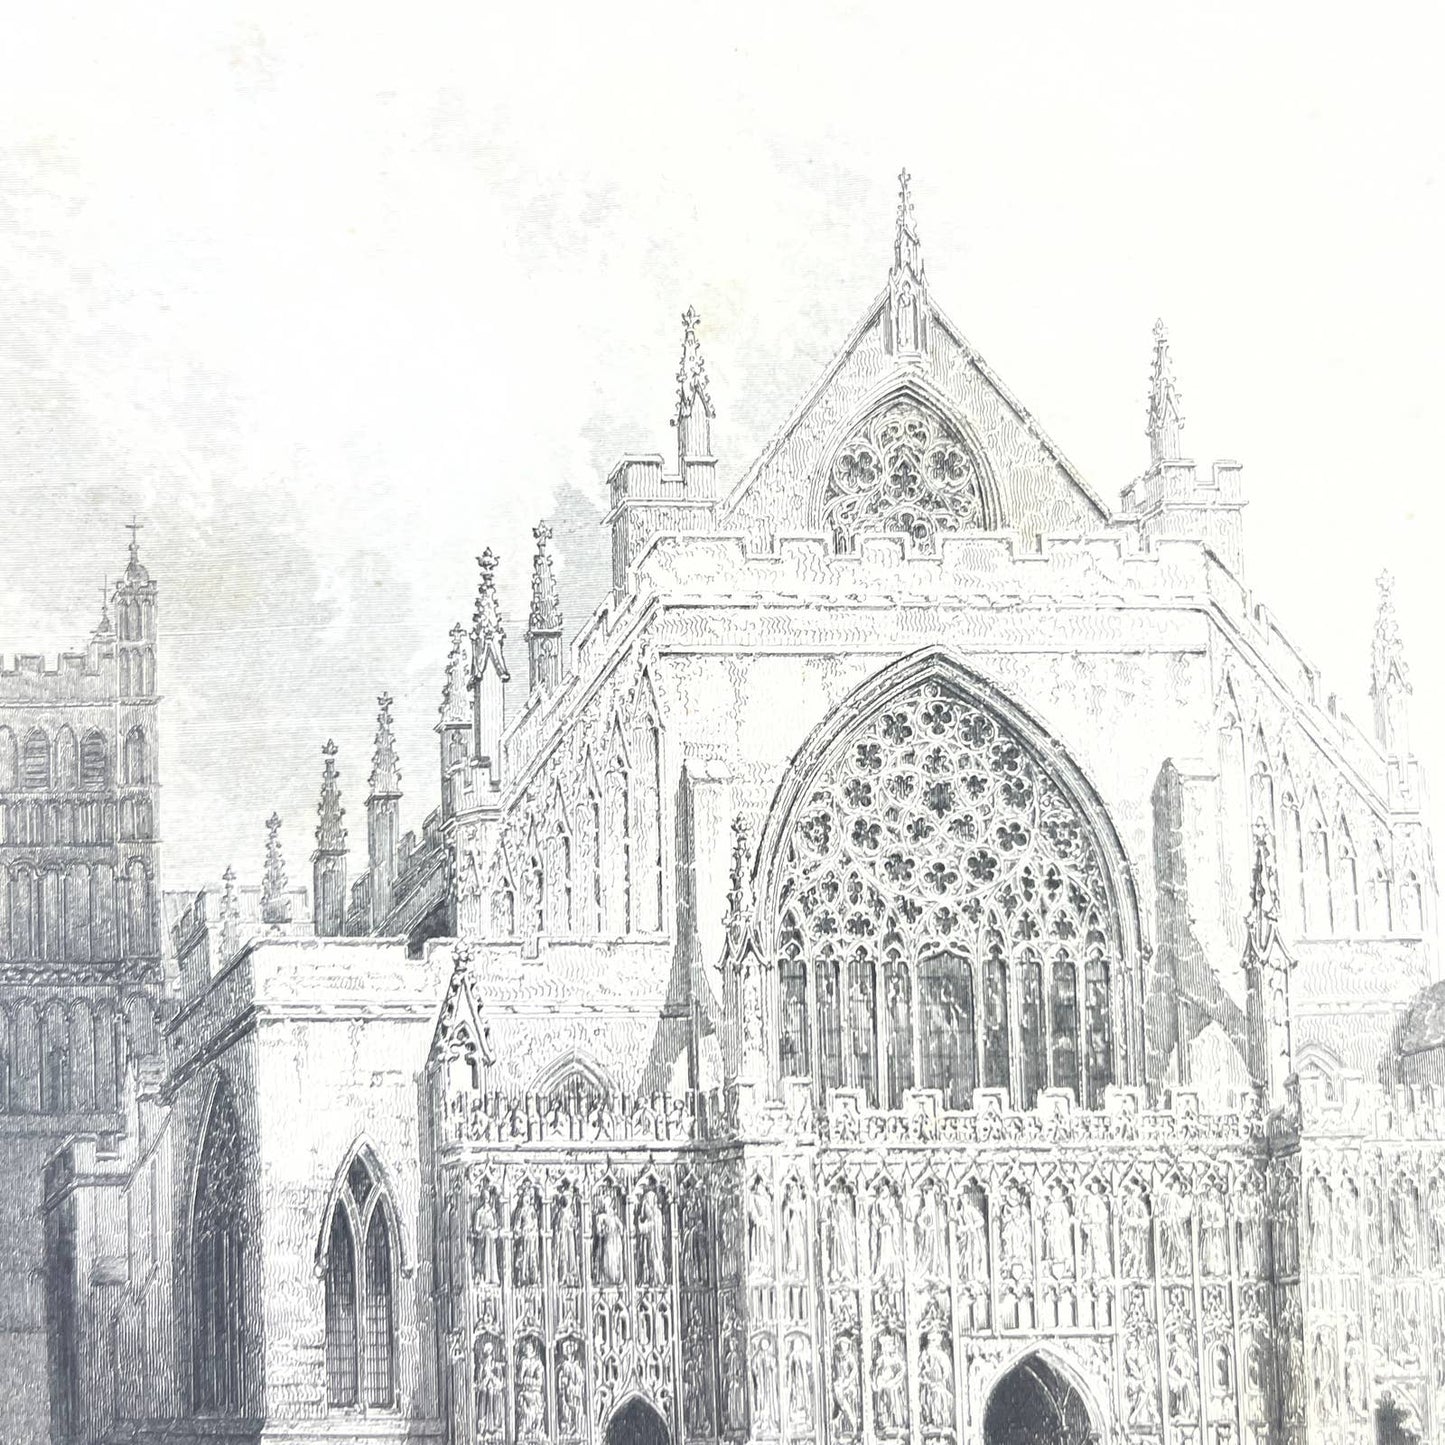 1836 Original Art Engraving Exeter Cathedral West Front, Floor Plan and Bio TG6